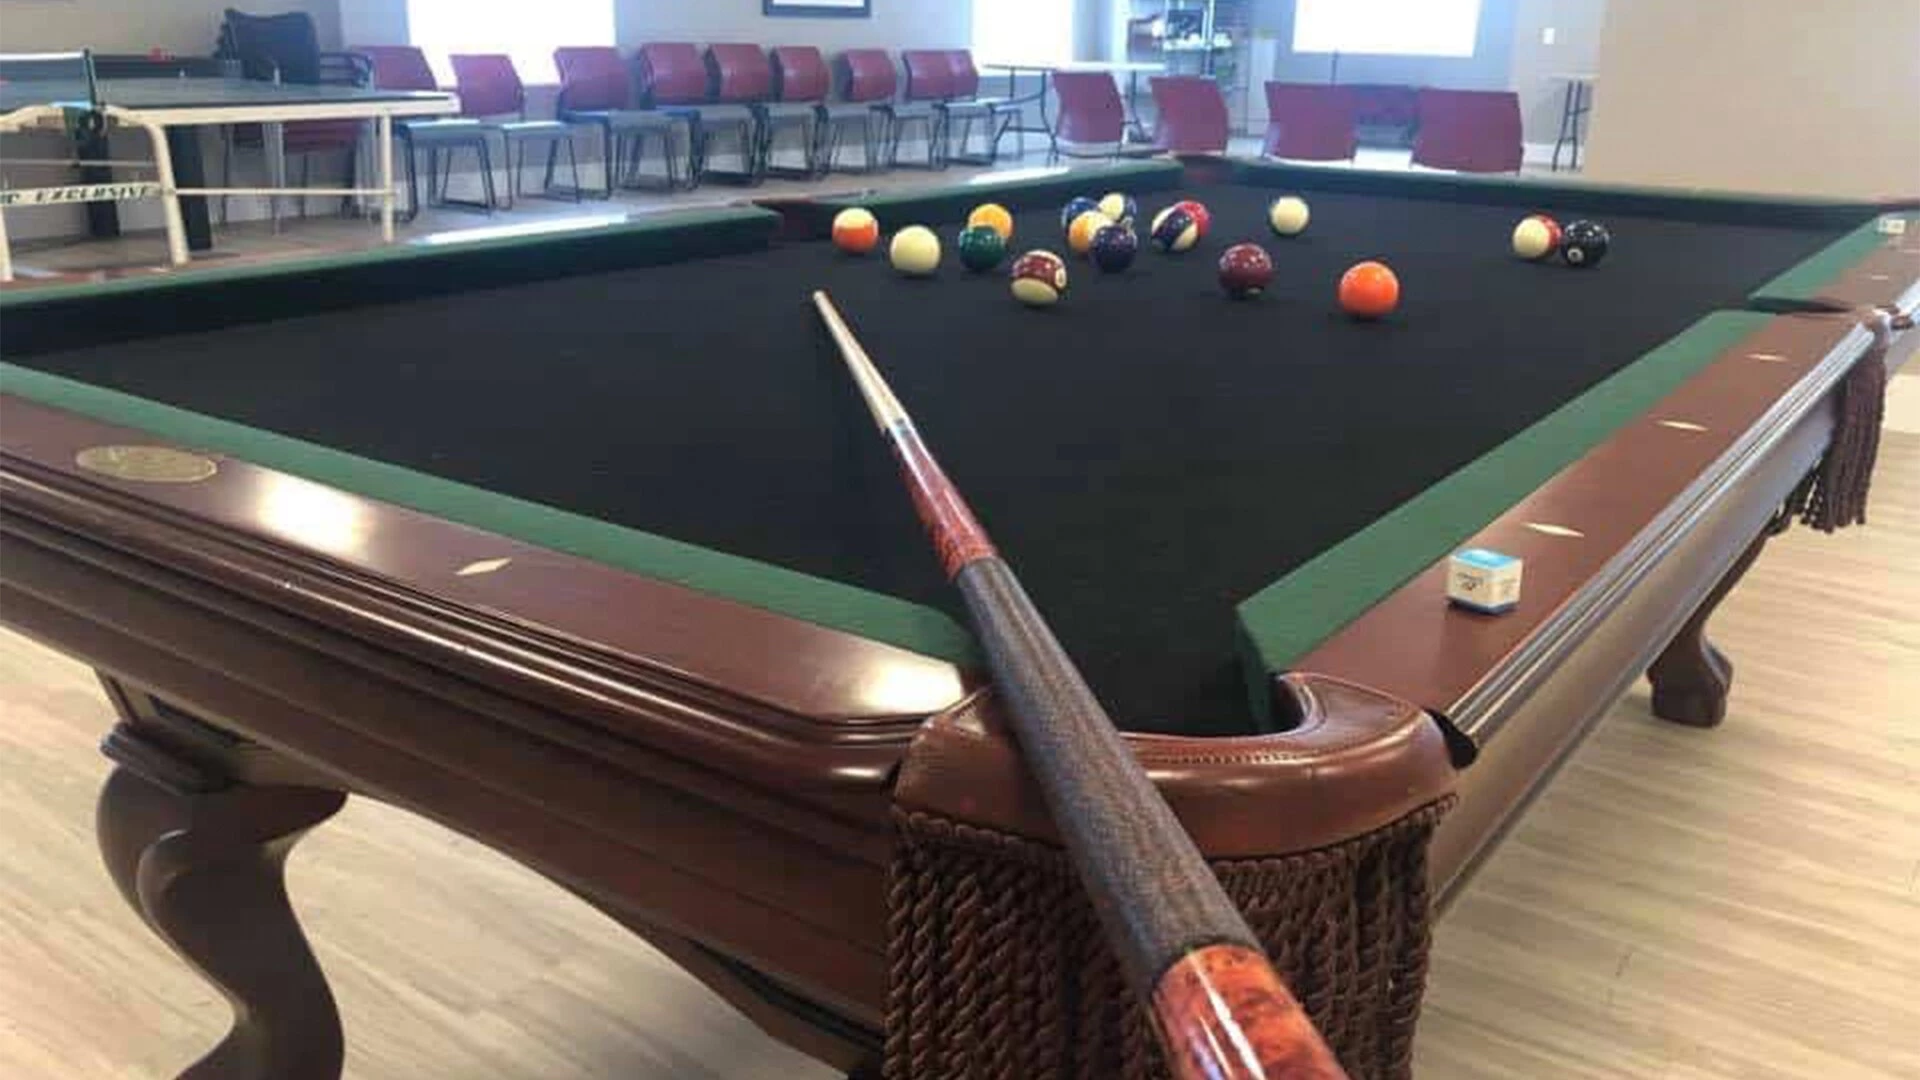 A pool stick laying on a pool table